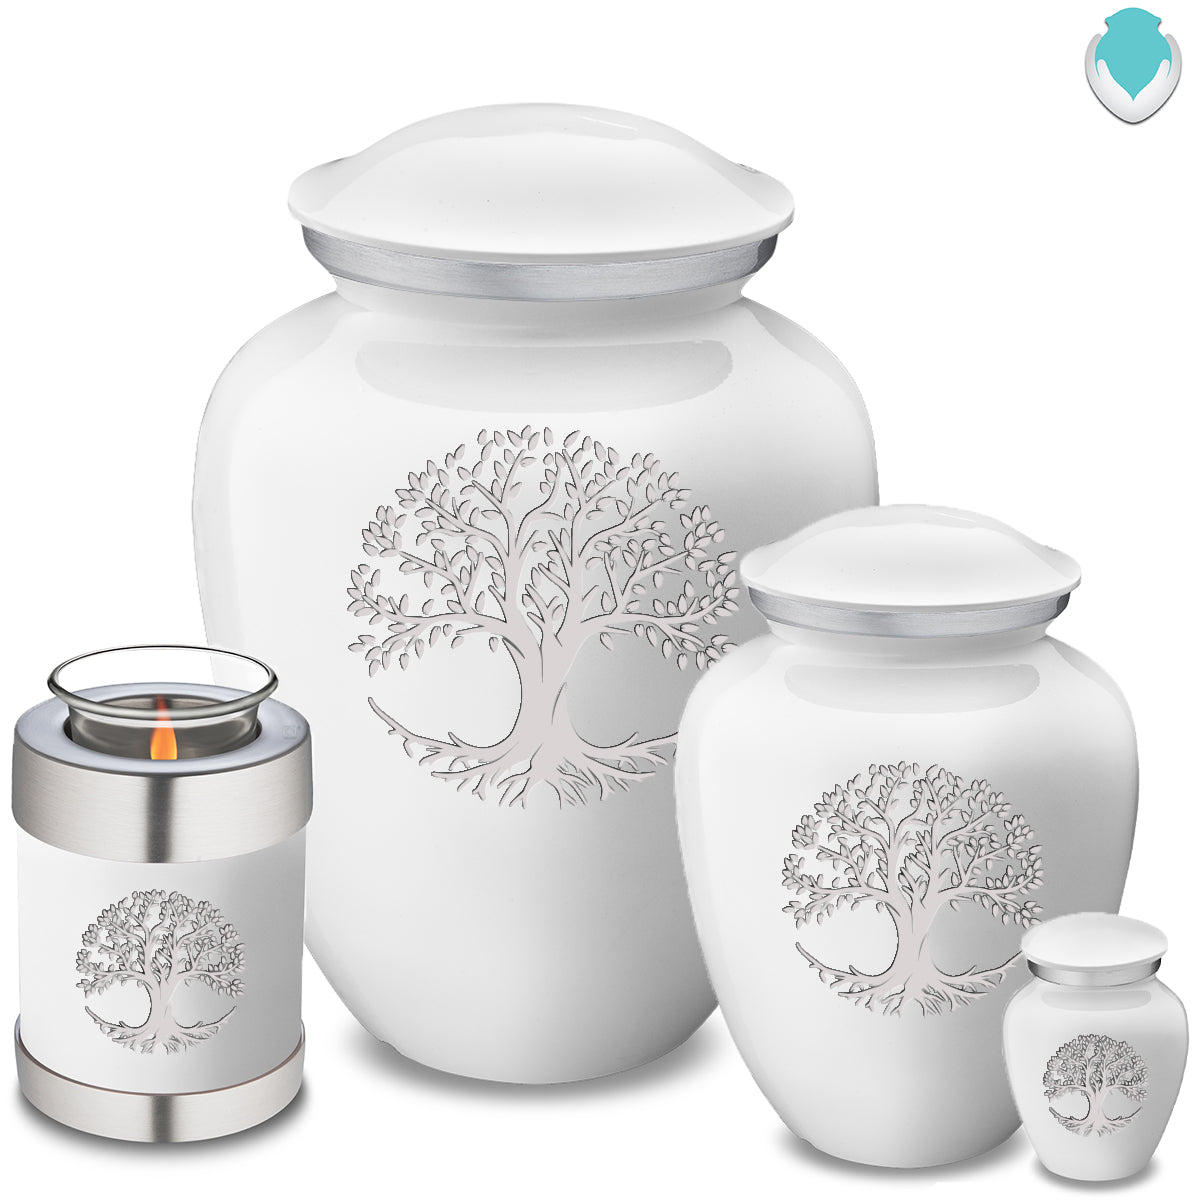 Adult Embrace White Tree of Life Cremation Urn